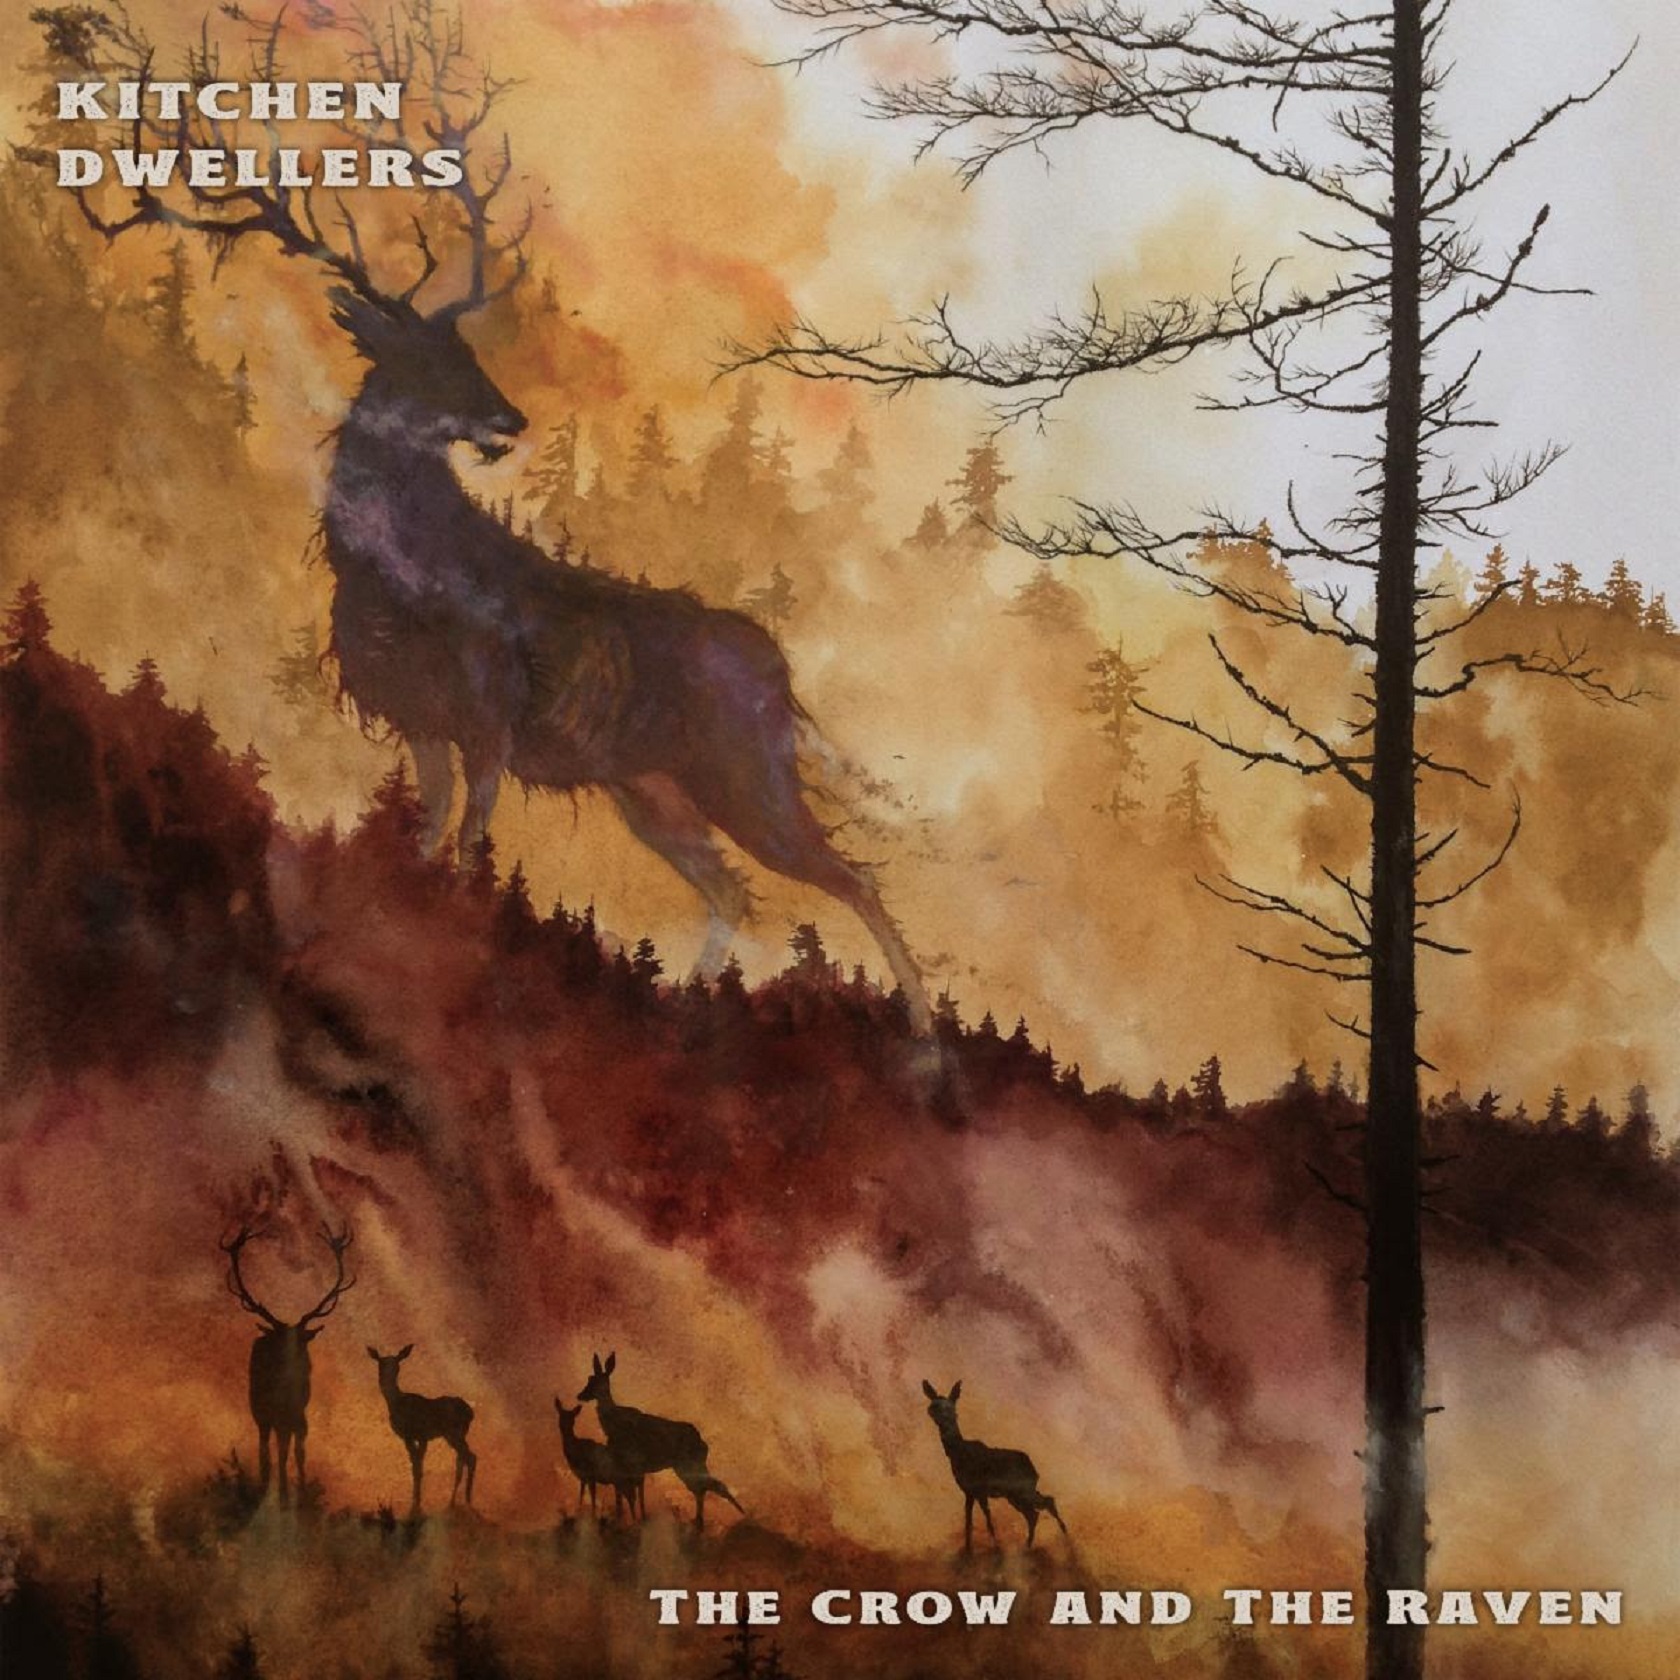 Kitchen Dwellers share 'The Crow and The Raven (III)' plus official music video directed by Kayla Arend